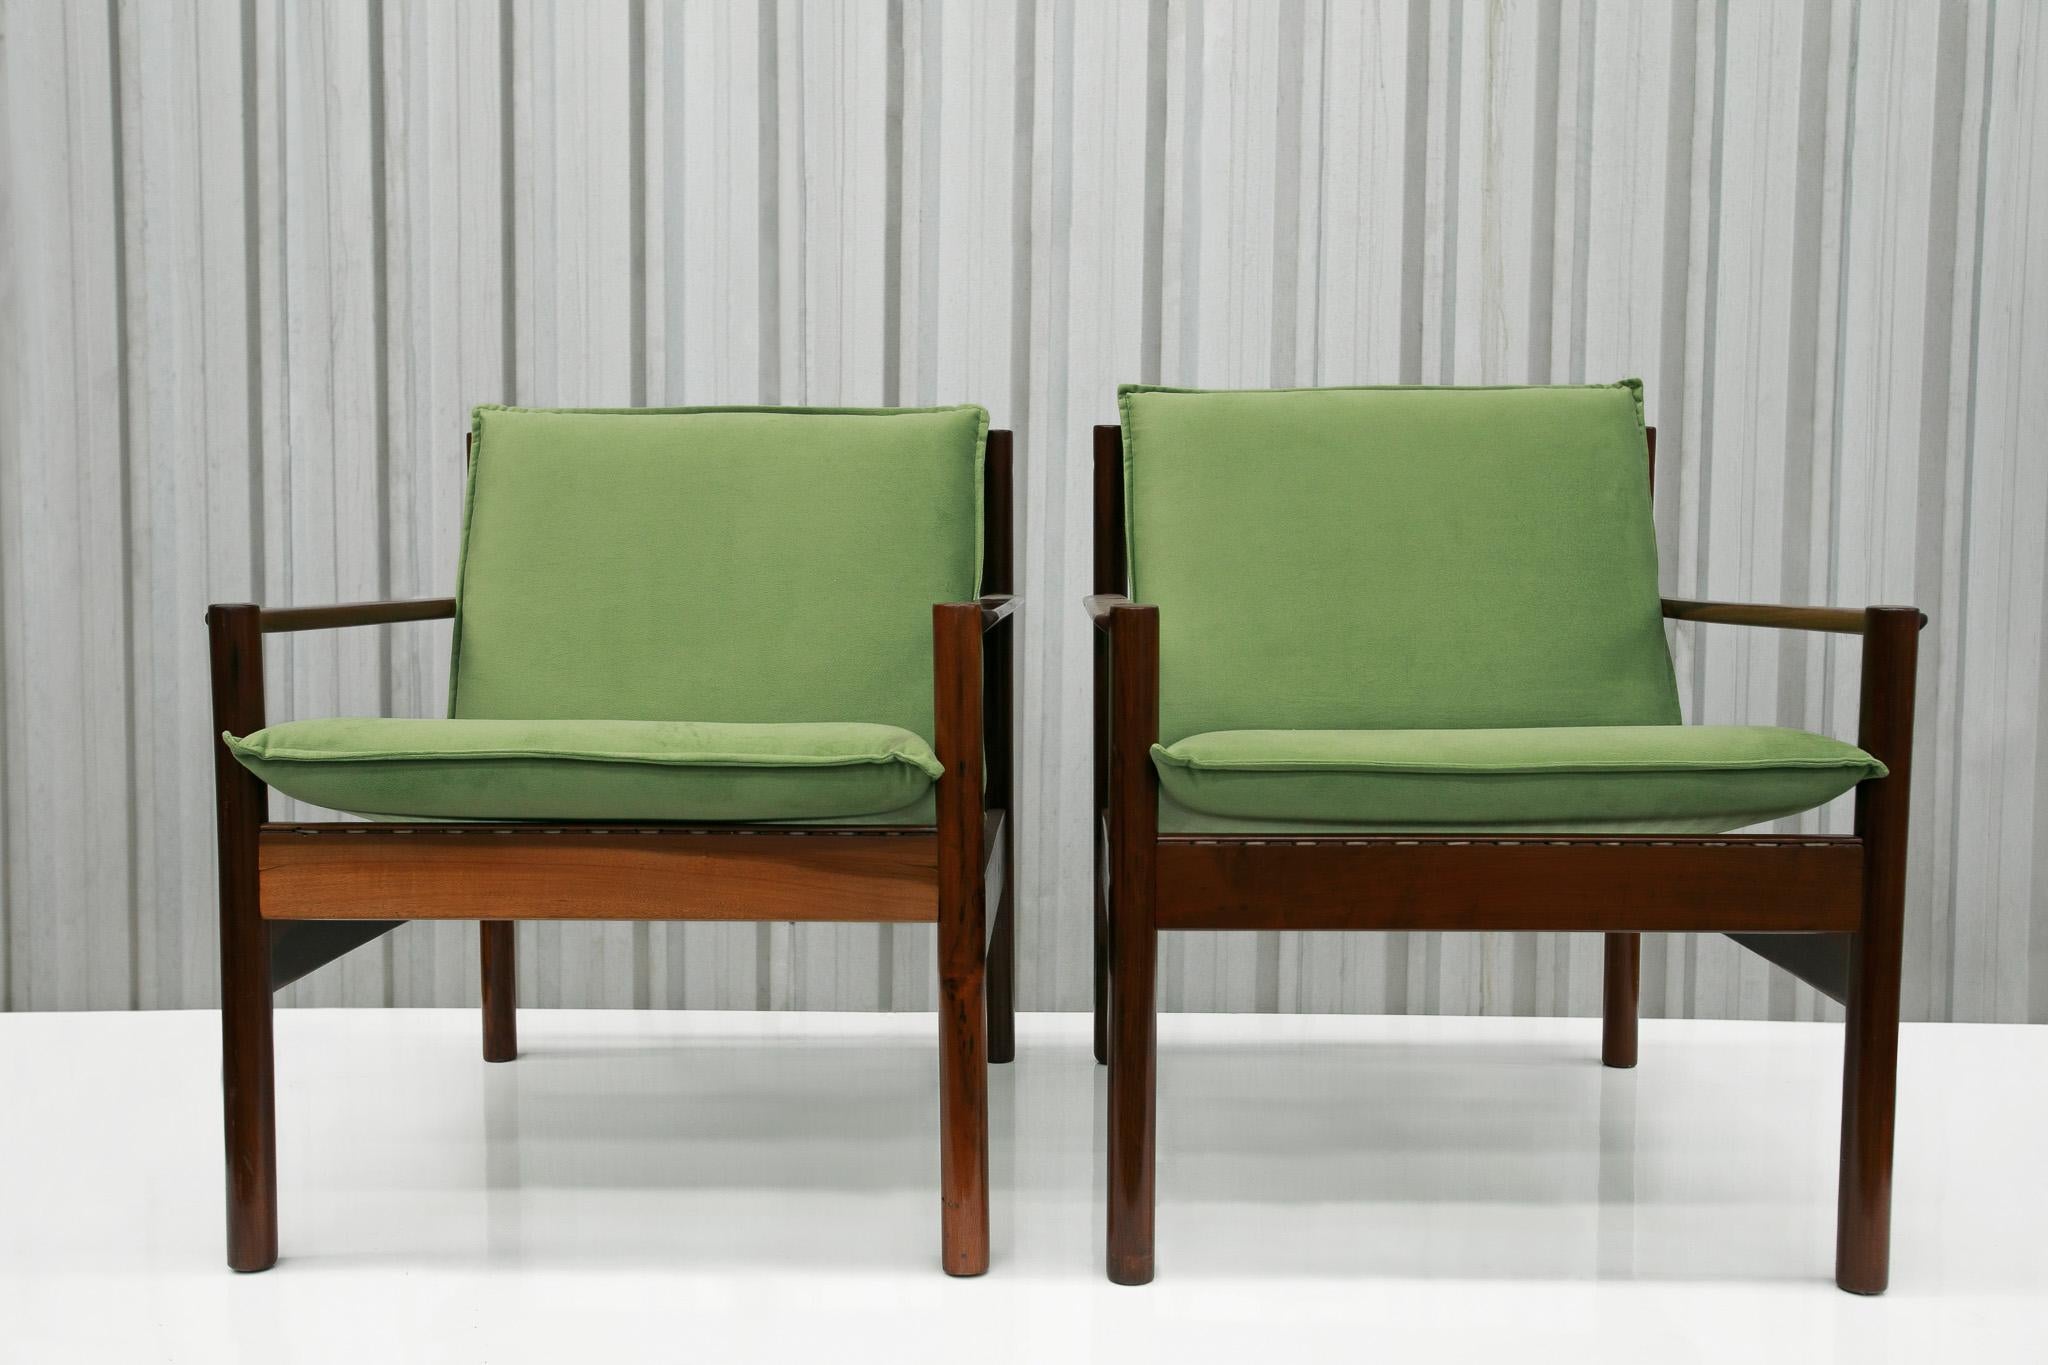 Available today this Brazilian Modern Armchairs made in Hardwood & Fabric desgned by Michel Arnoult, 1960s are nothing less than spectacular!

They were designed in the 1960’s and are called “Ouro Preto.” It is one of Arnoult’s most well-known